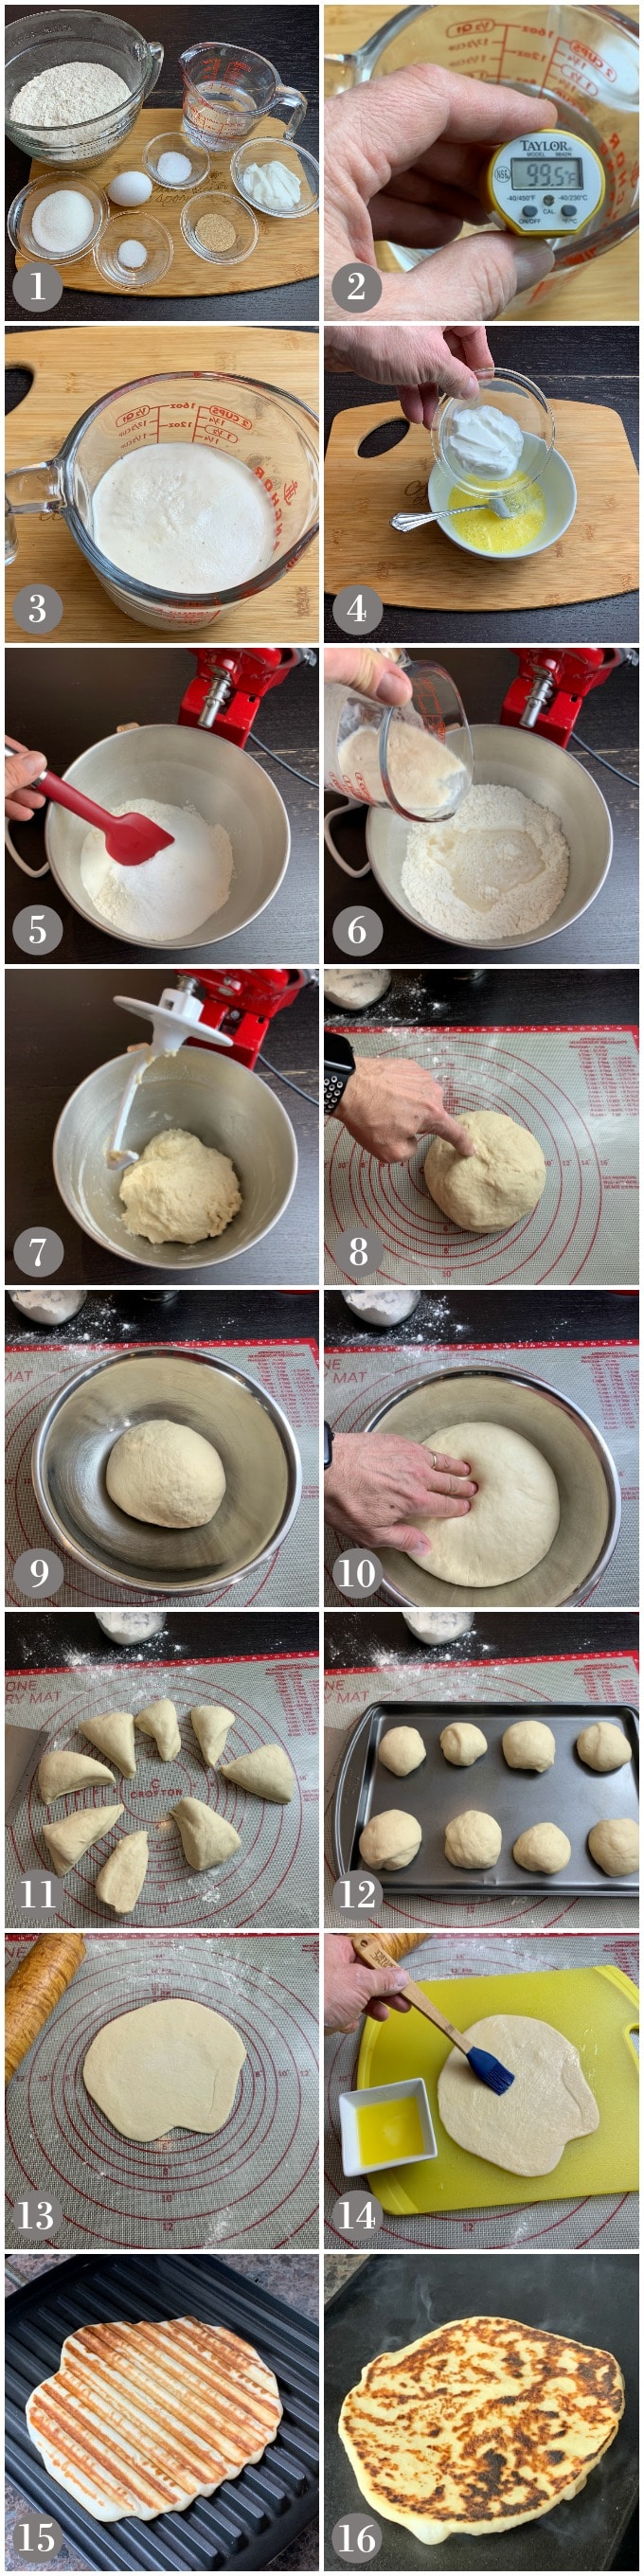 A collage of photos showing the ingredients and steps to make naan bread on a griddle or panini press.